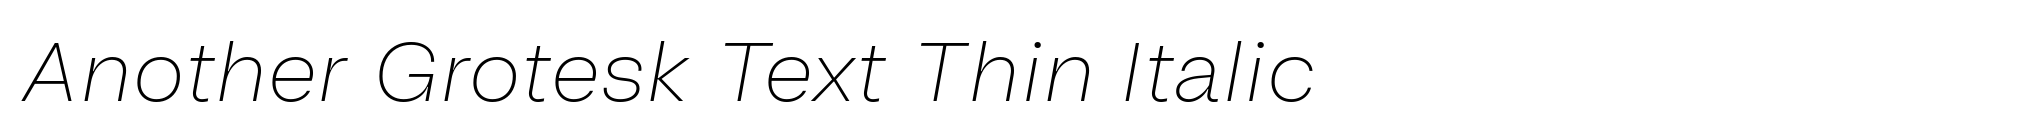 Another Grotesk Text Thin Italic image